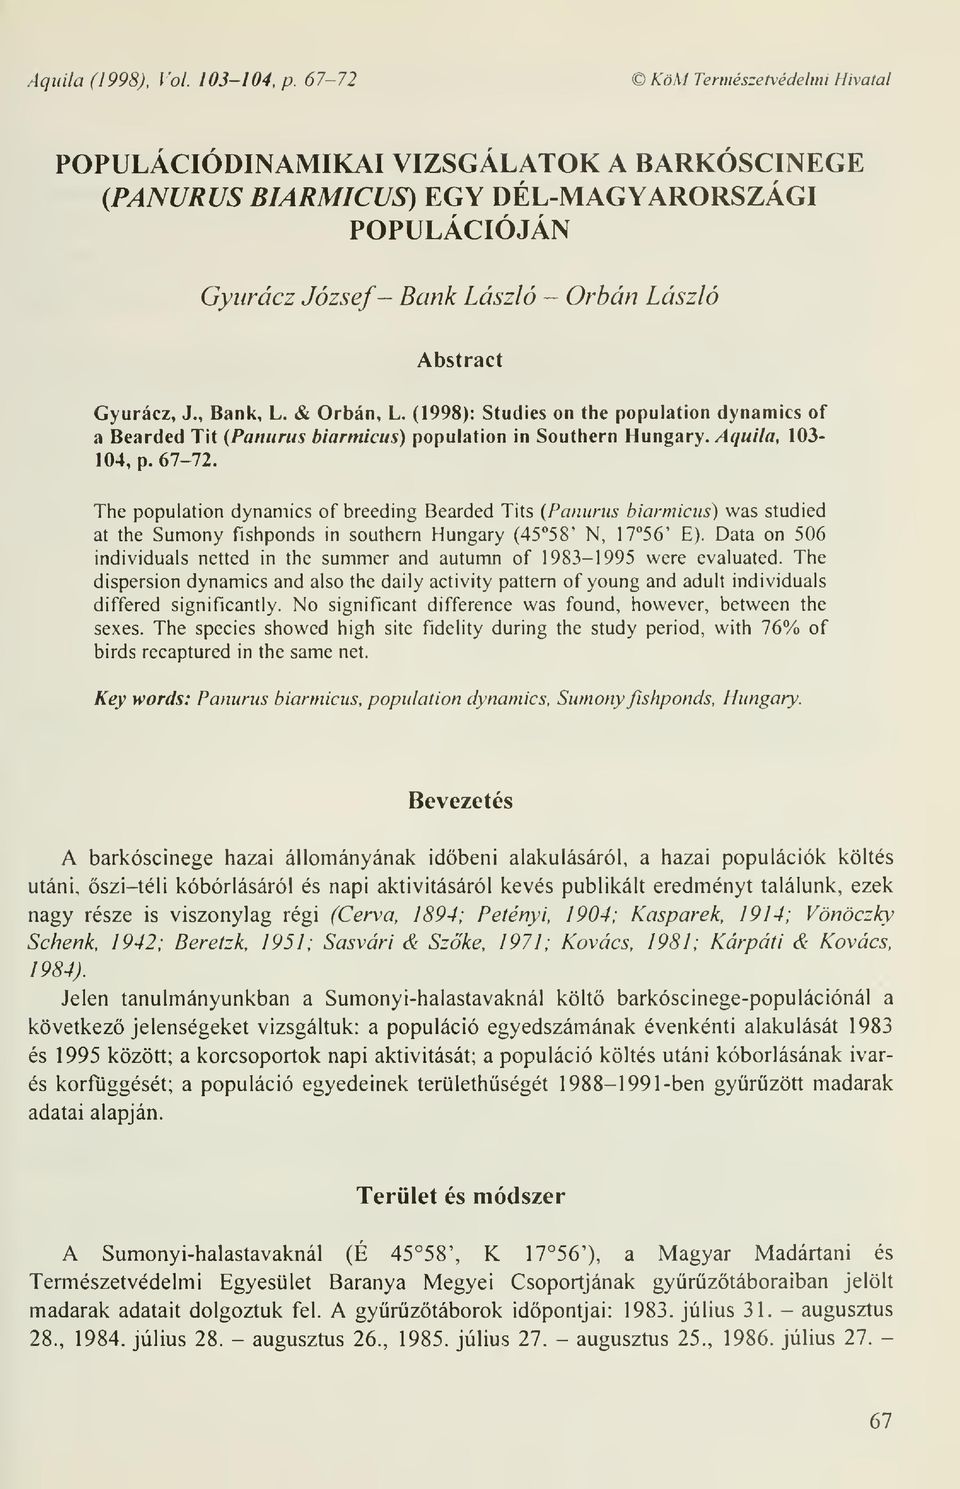 , Bank, L. & Orbán, L. (1998): Studies on the population dynamics of a Bearded Tit (Panurus biarmicus) population in Southern Hungary. Aquila, 103-104, p. 67-72.